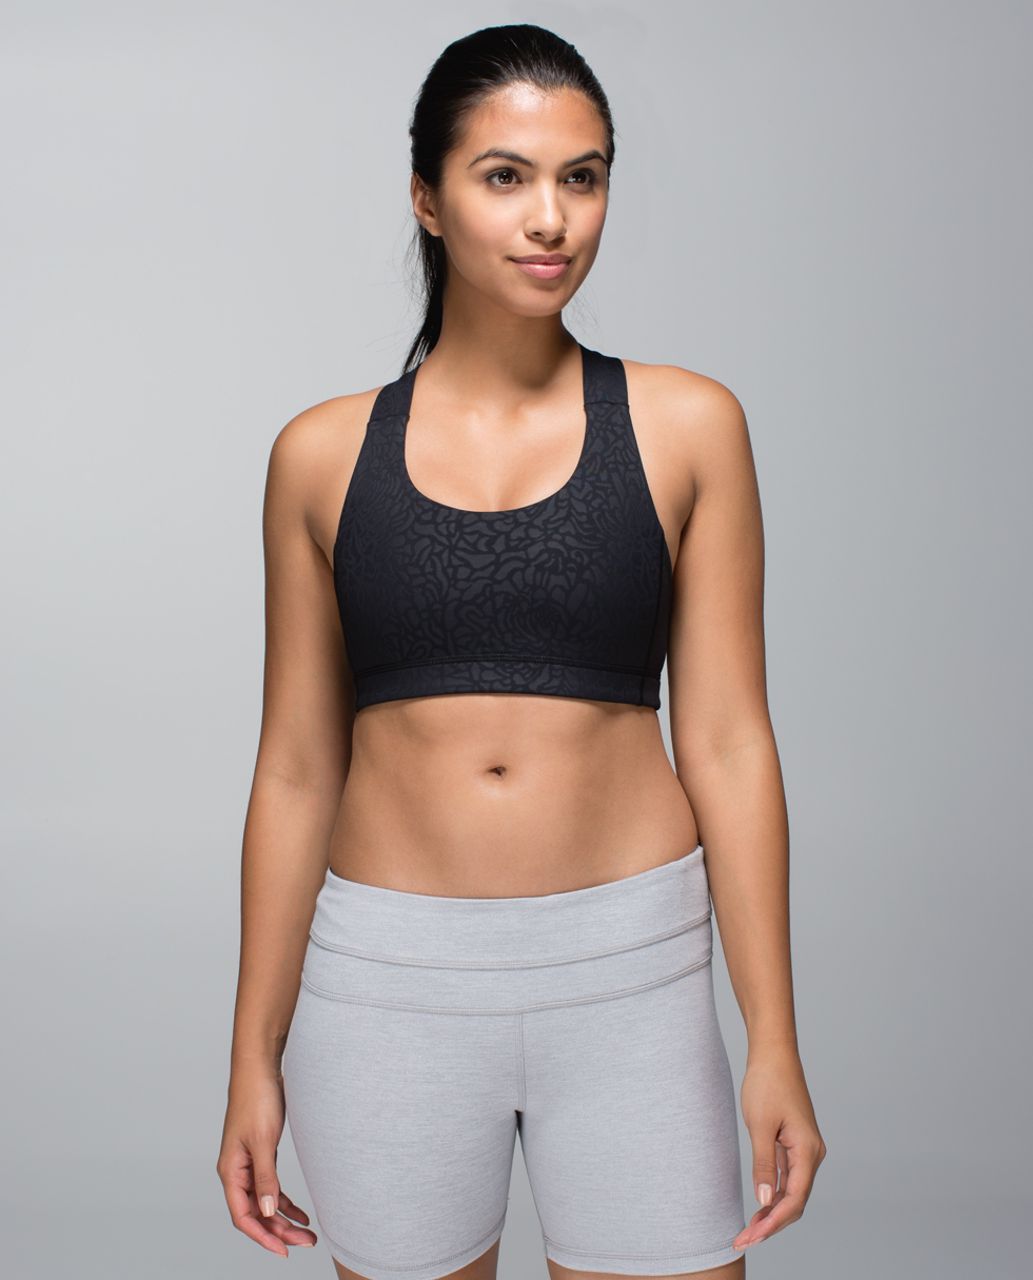 Lululemon Review: Our Favorite Leggings, Sports Bras, and More